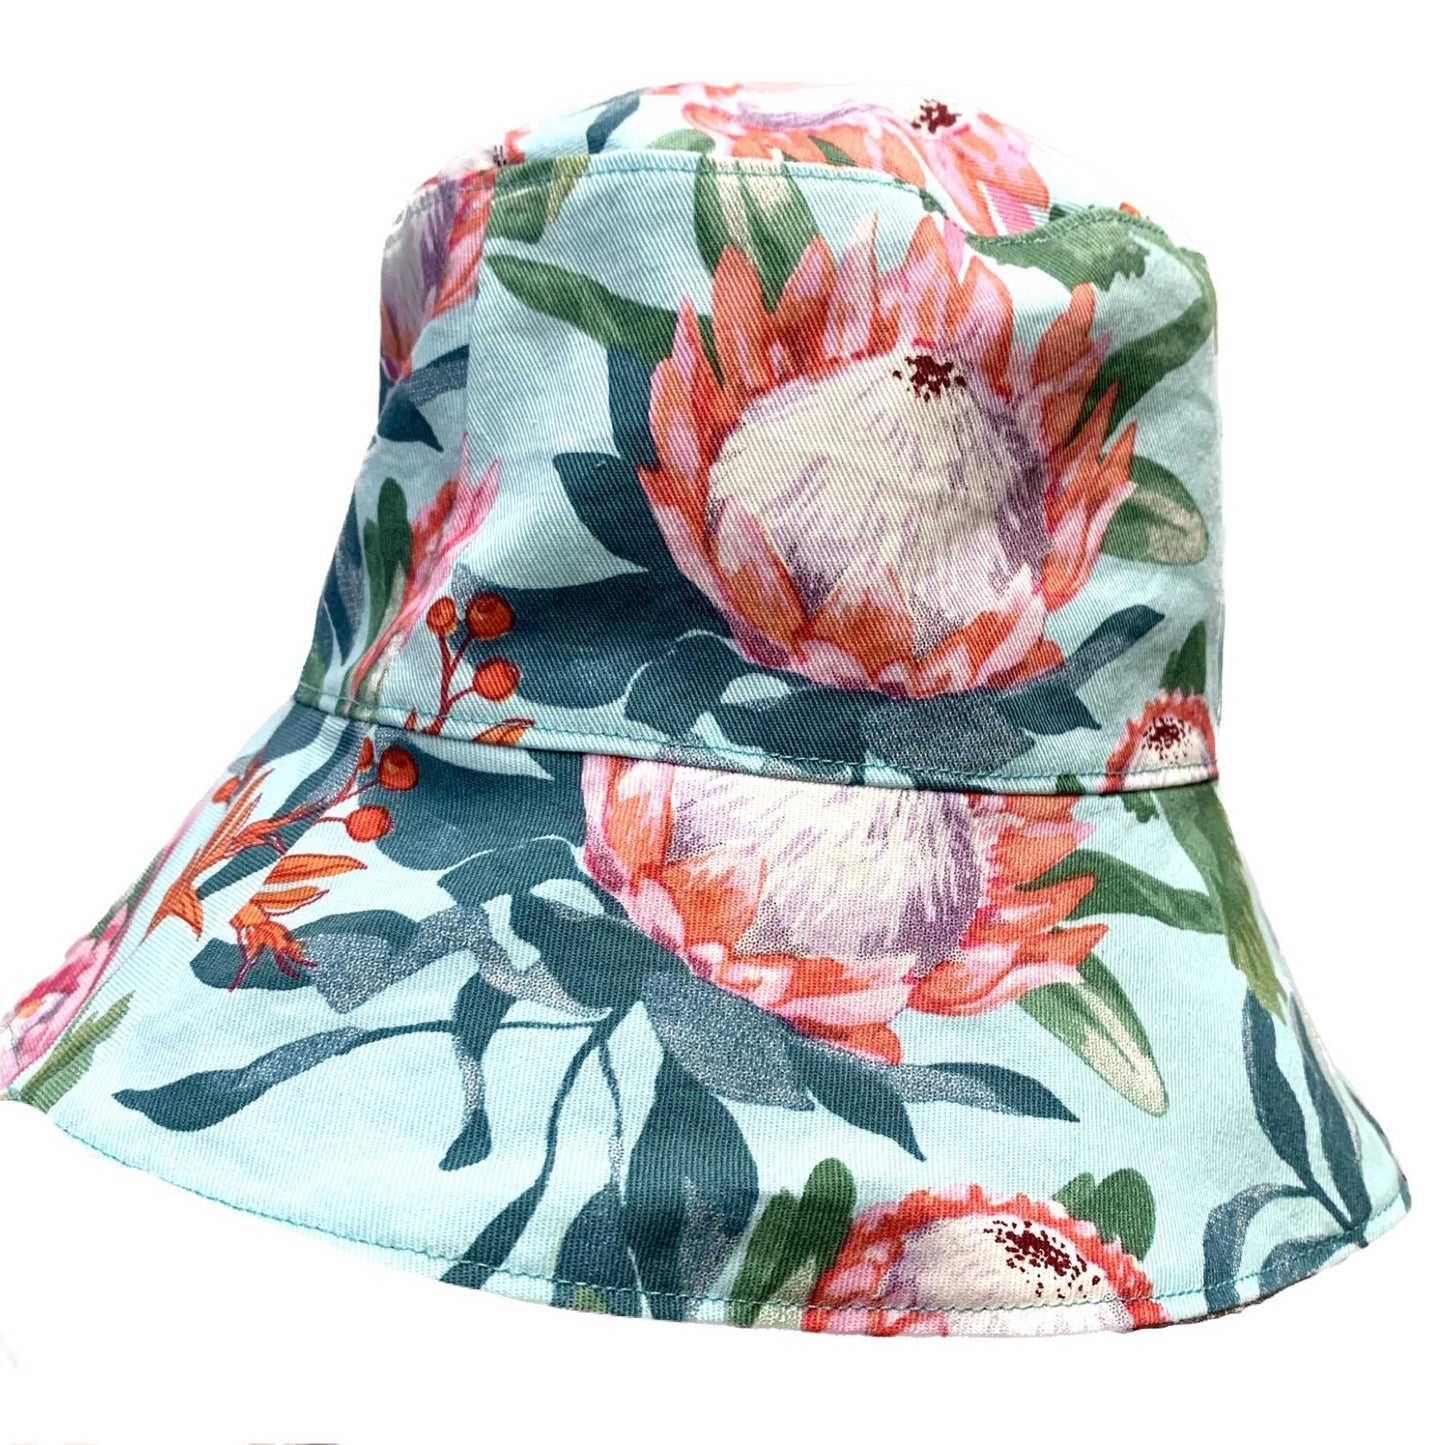 Teacups n Quilts- Light Blue Fabric Hat with Protea Print- Adult Size